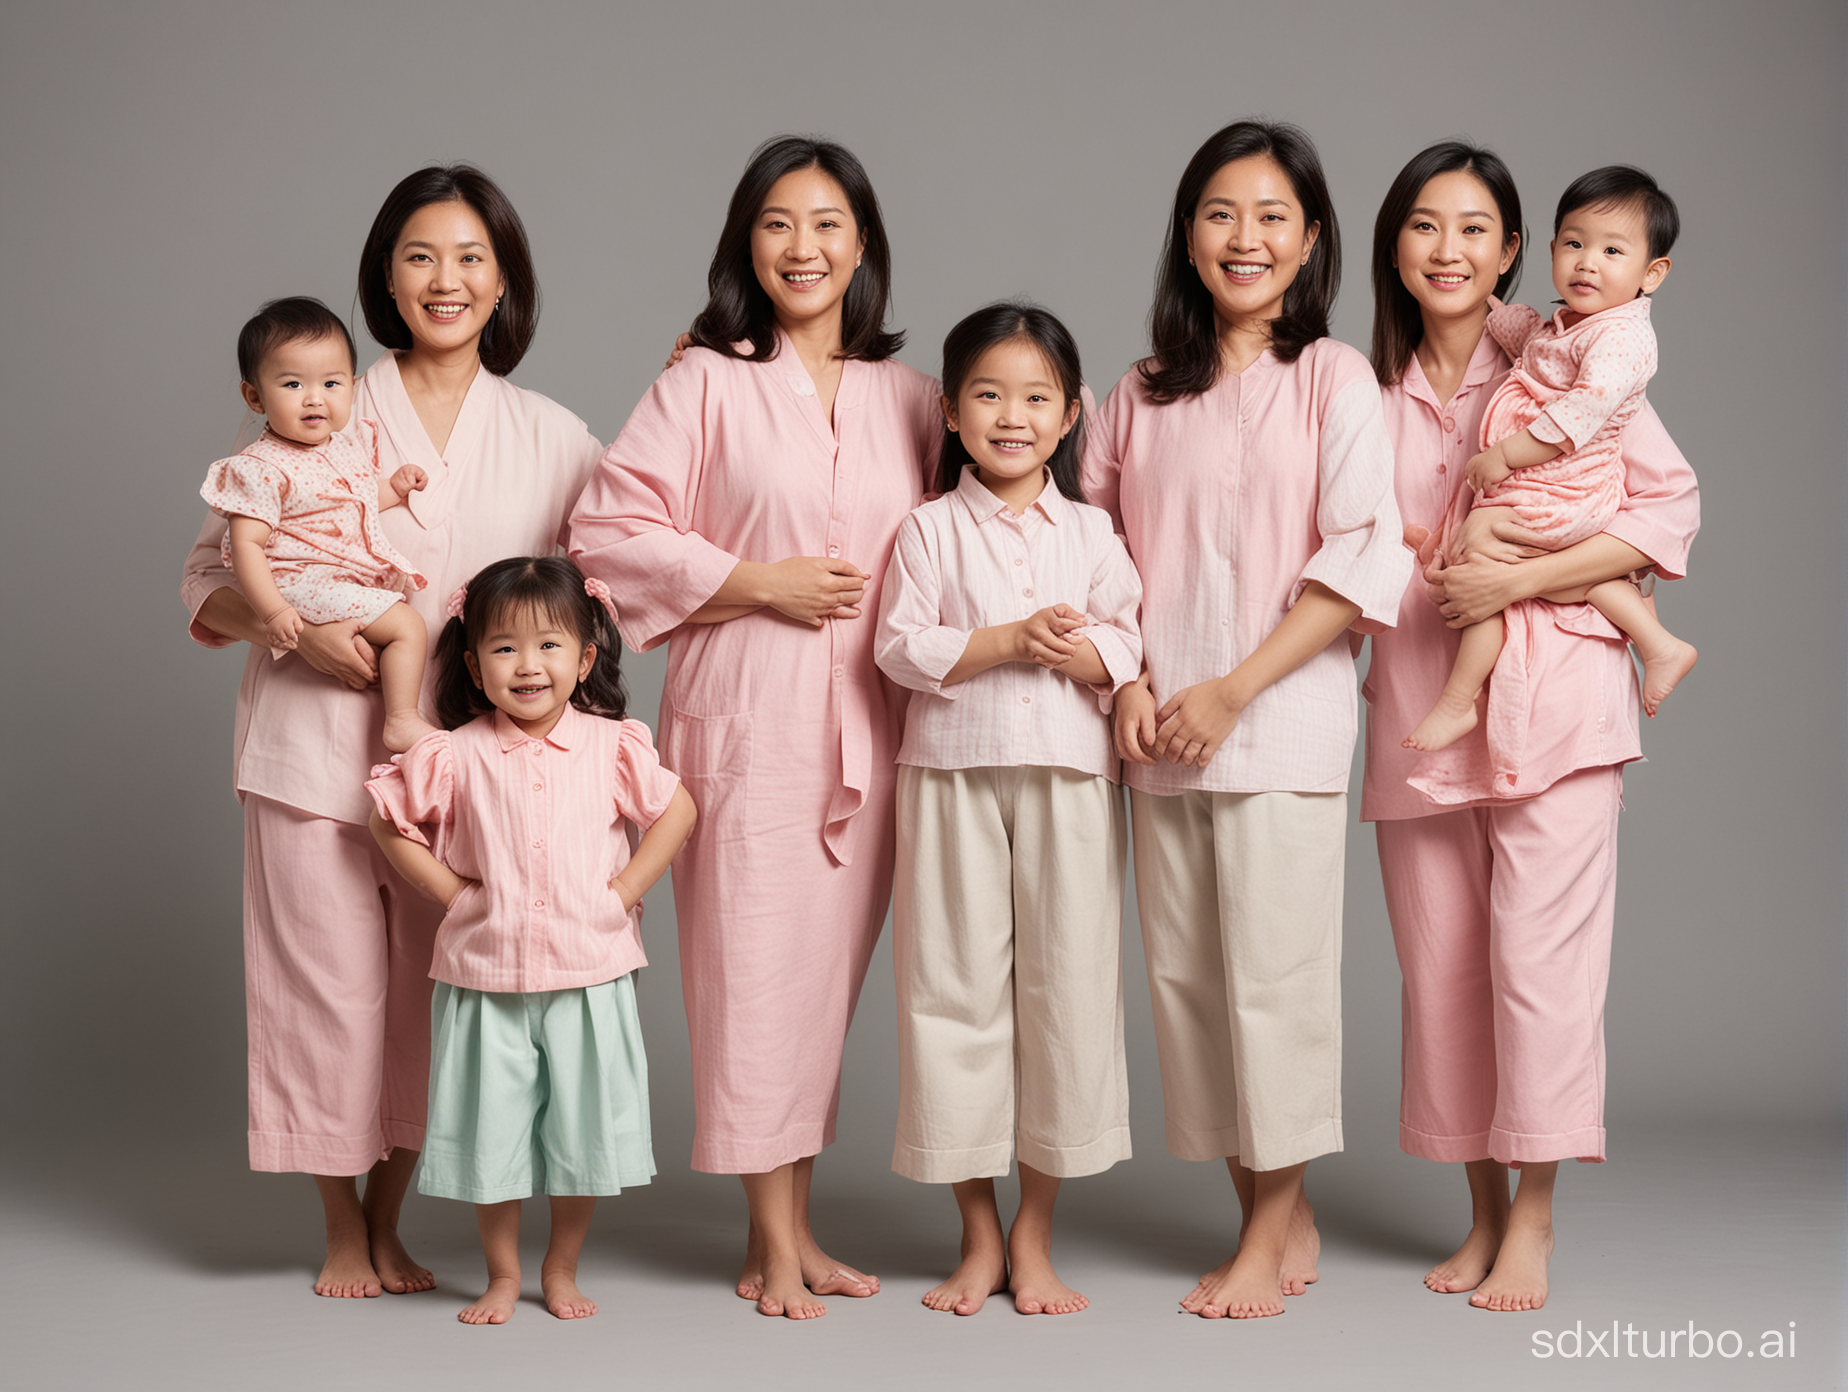 A GROUP OF 4 asian MOMS AND 4 KIDS POSING IN STUDIO SOFTLY, FRIENDLY